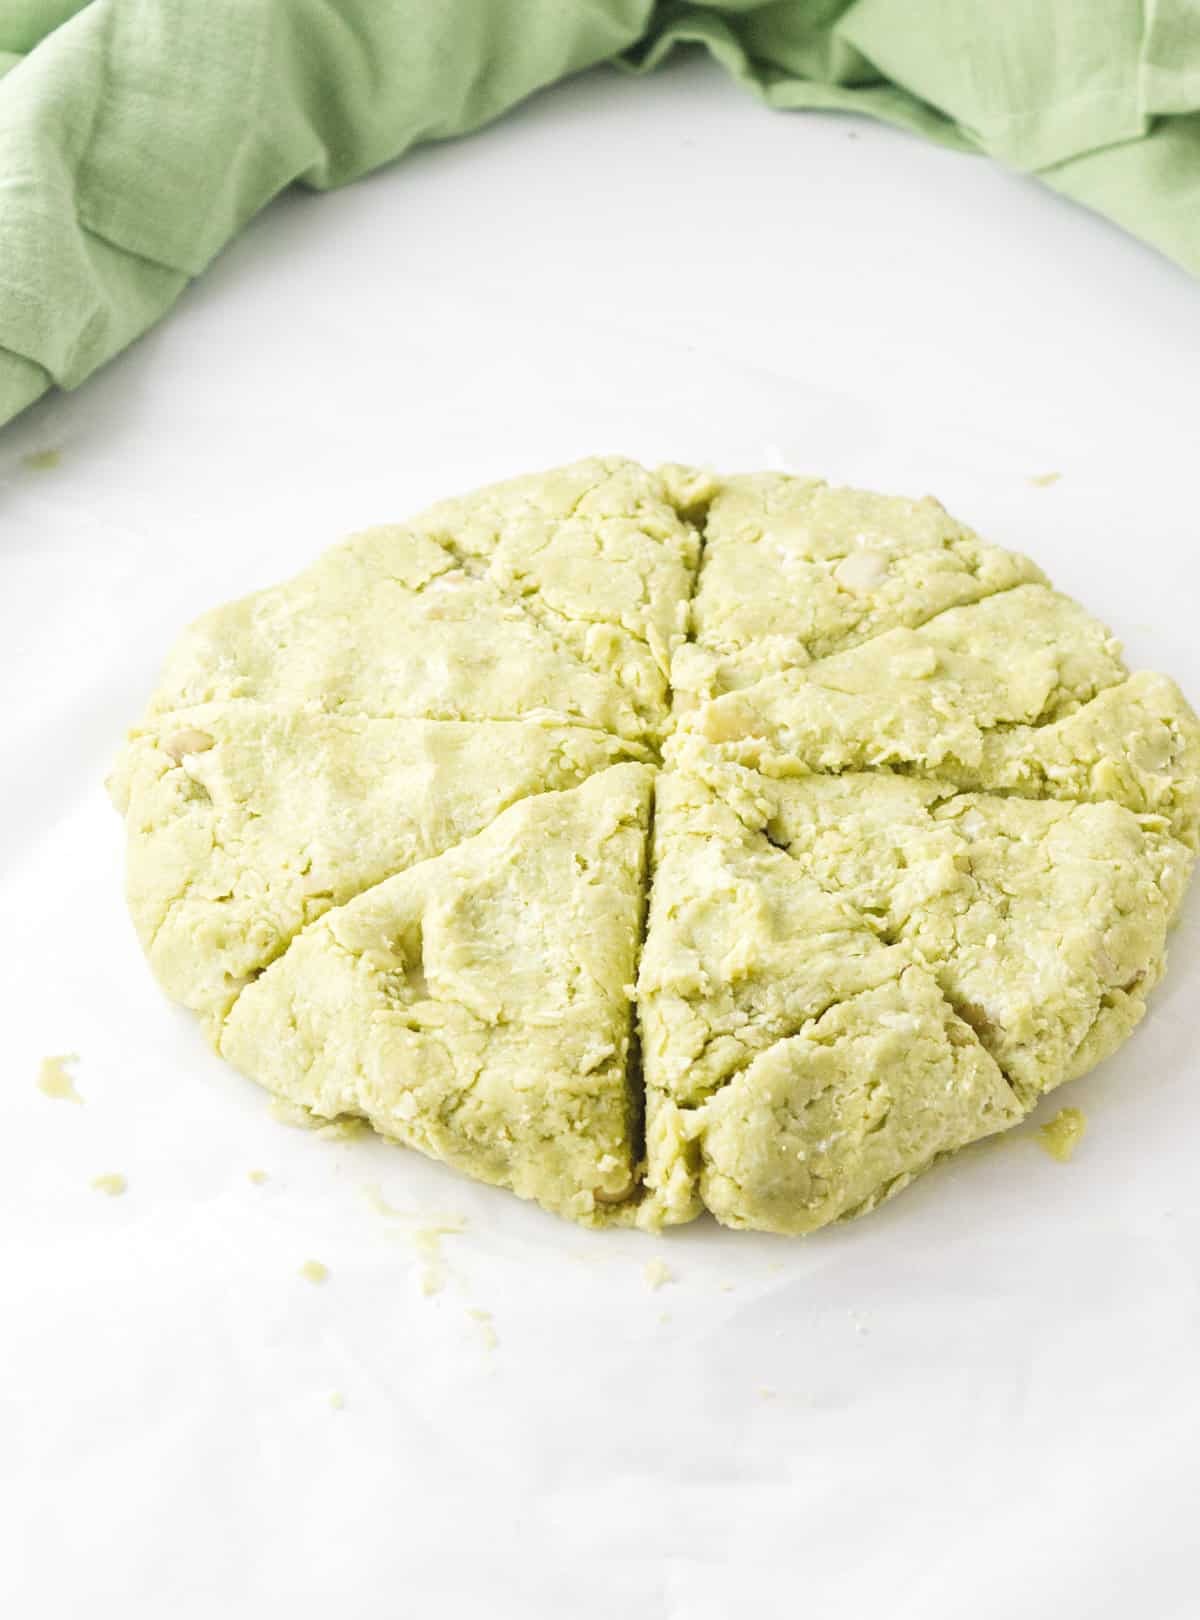 disc of green dough cut into 8 wedges.